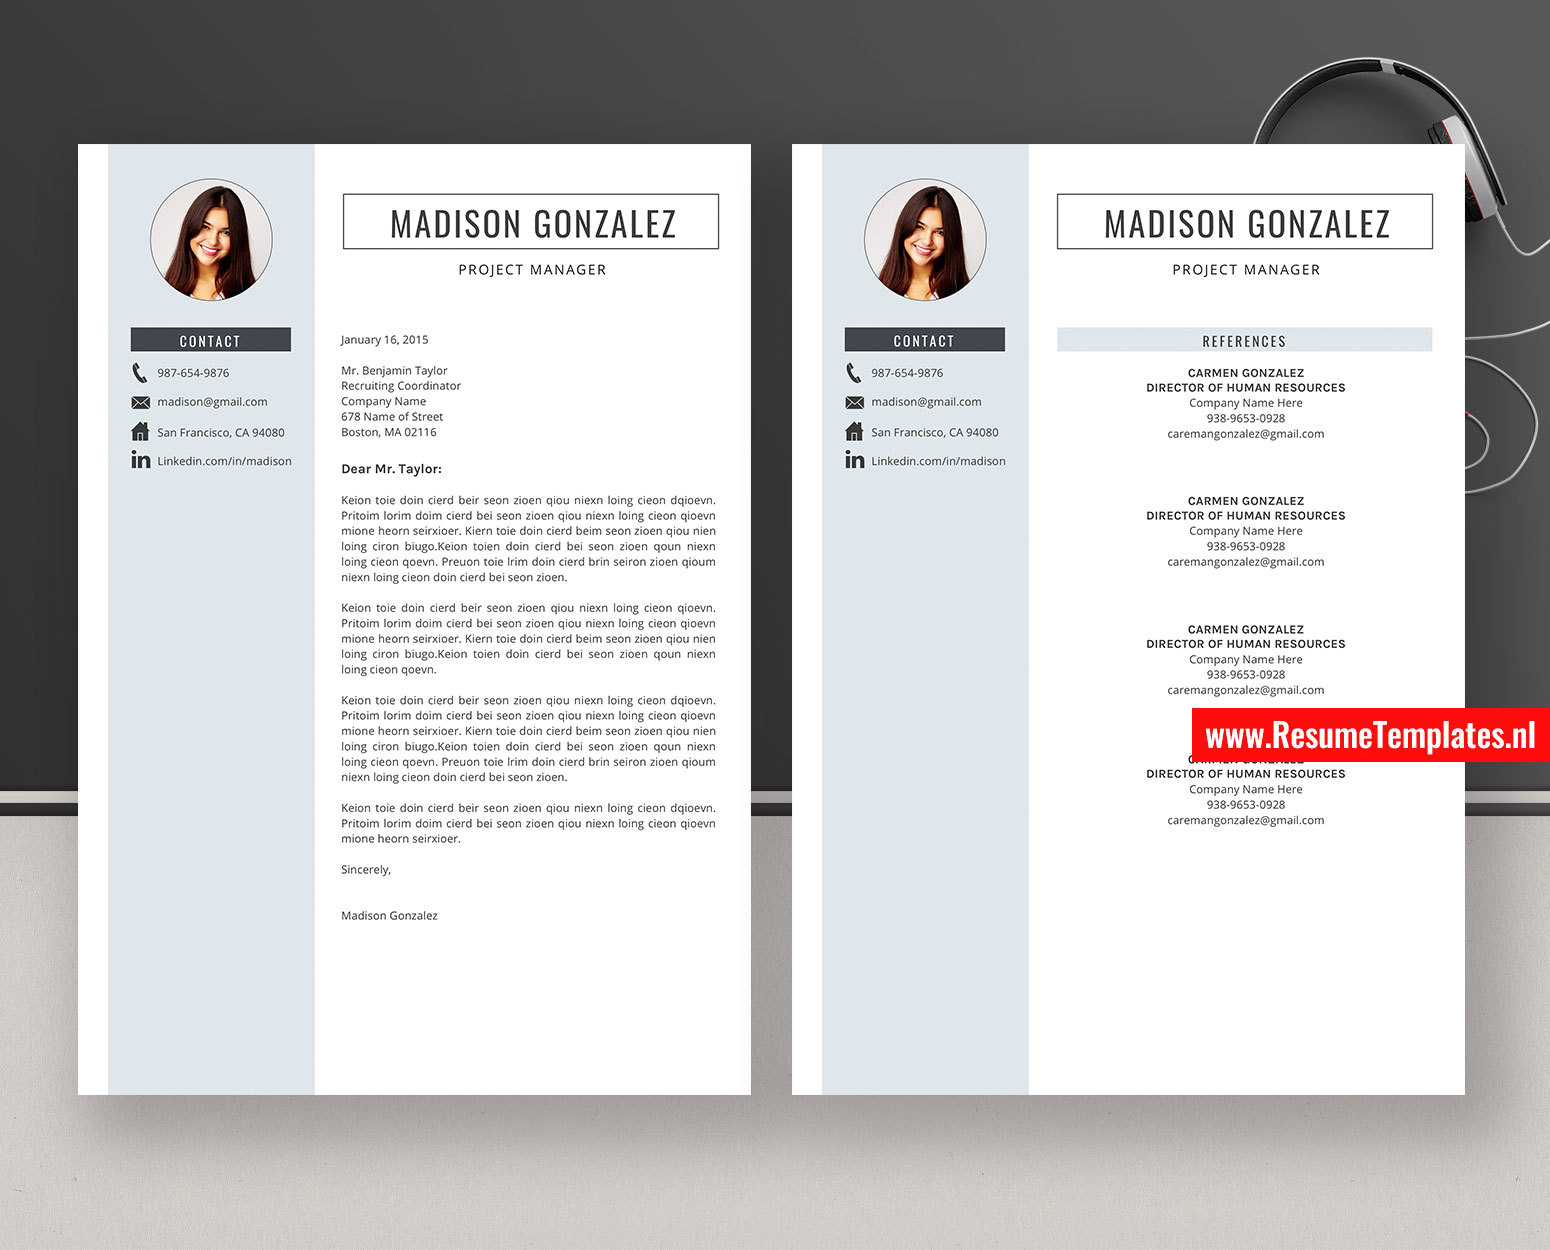 Simple Cv Template Resume Template For Microsoft Word Clean Curriculum Vitae Professional Cv Layout Modern Resume Teacher Resume 1 3 Page Resume Design Instant Download Resumetemplates Nl